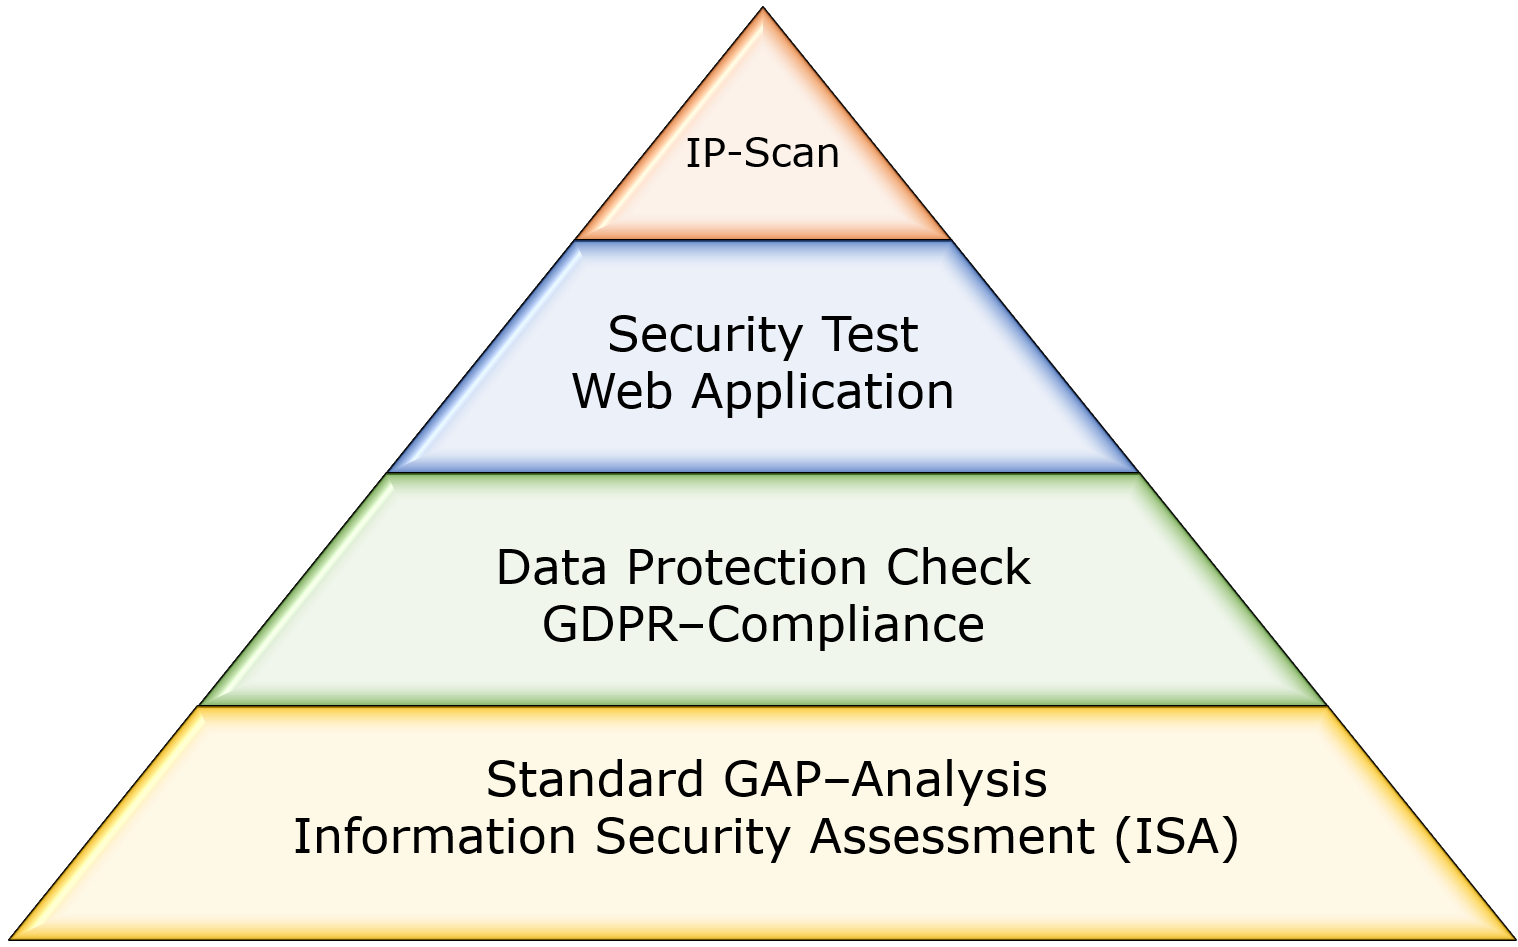 Image: Pyramid - standard GAP analysis, information security assessment (ISA), GDPR compliance, data protection check, security test, IP-Scan